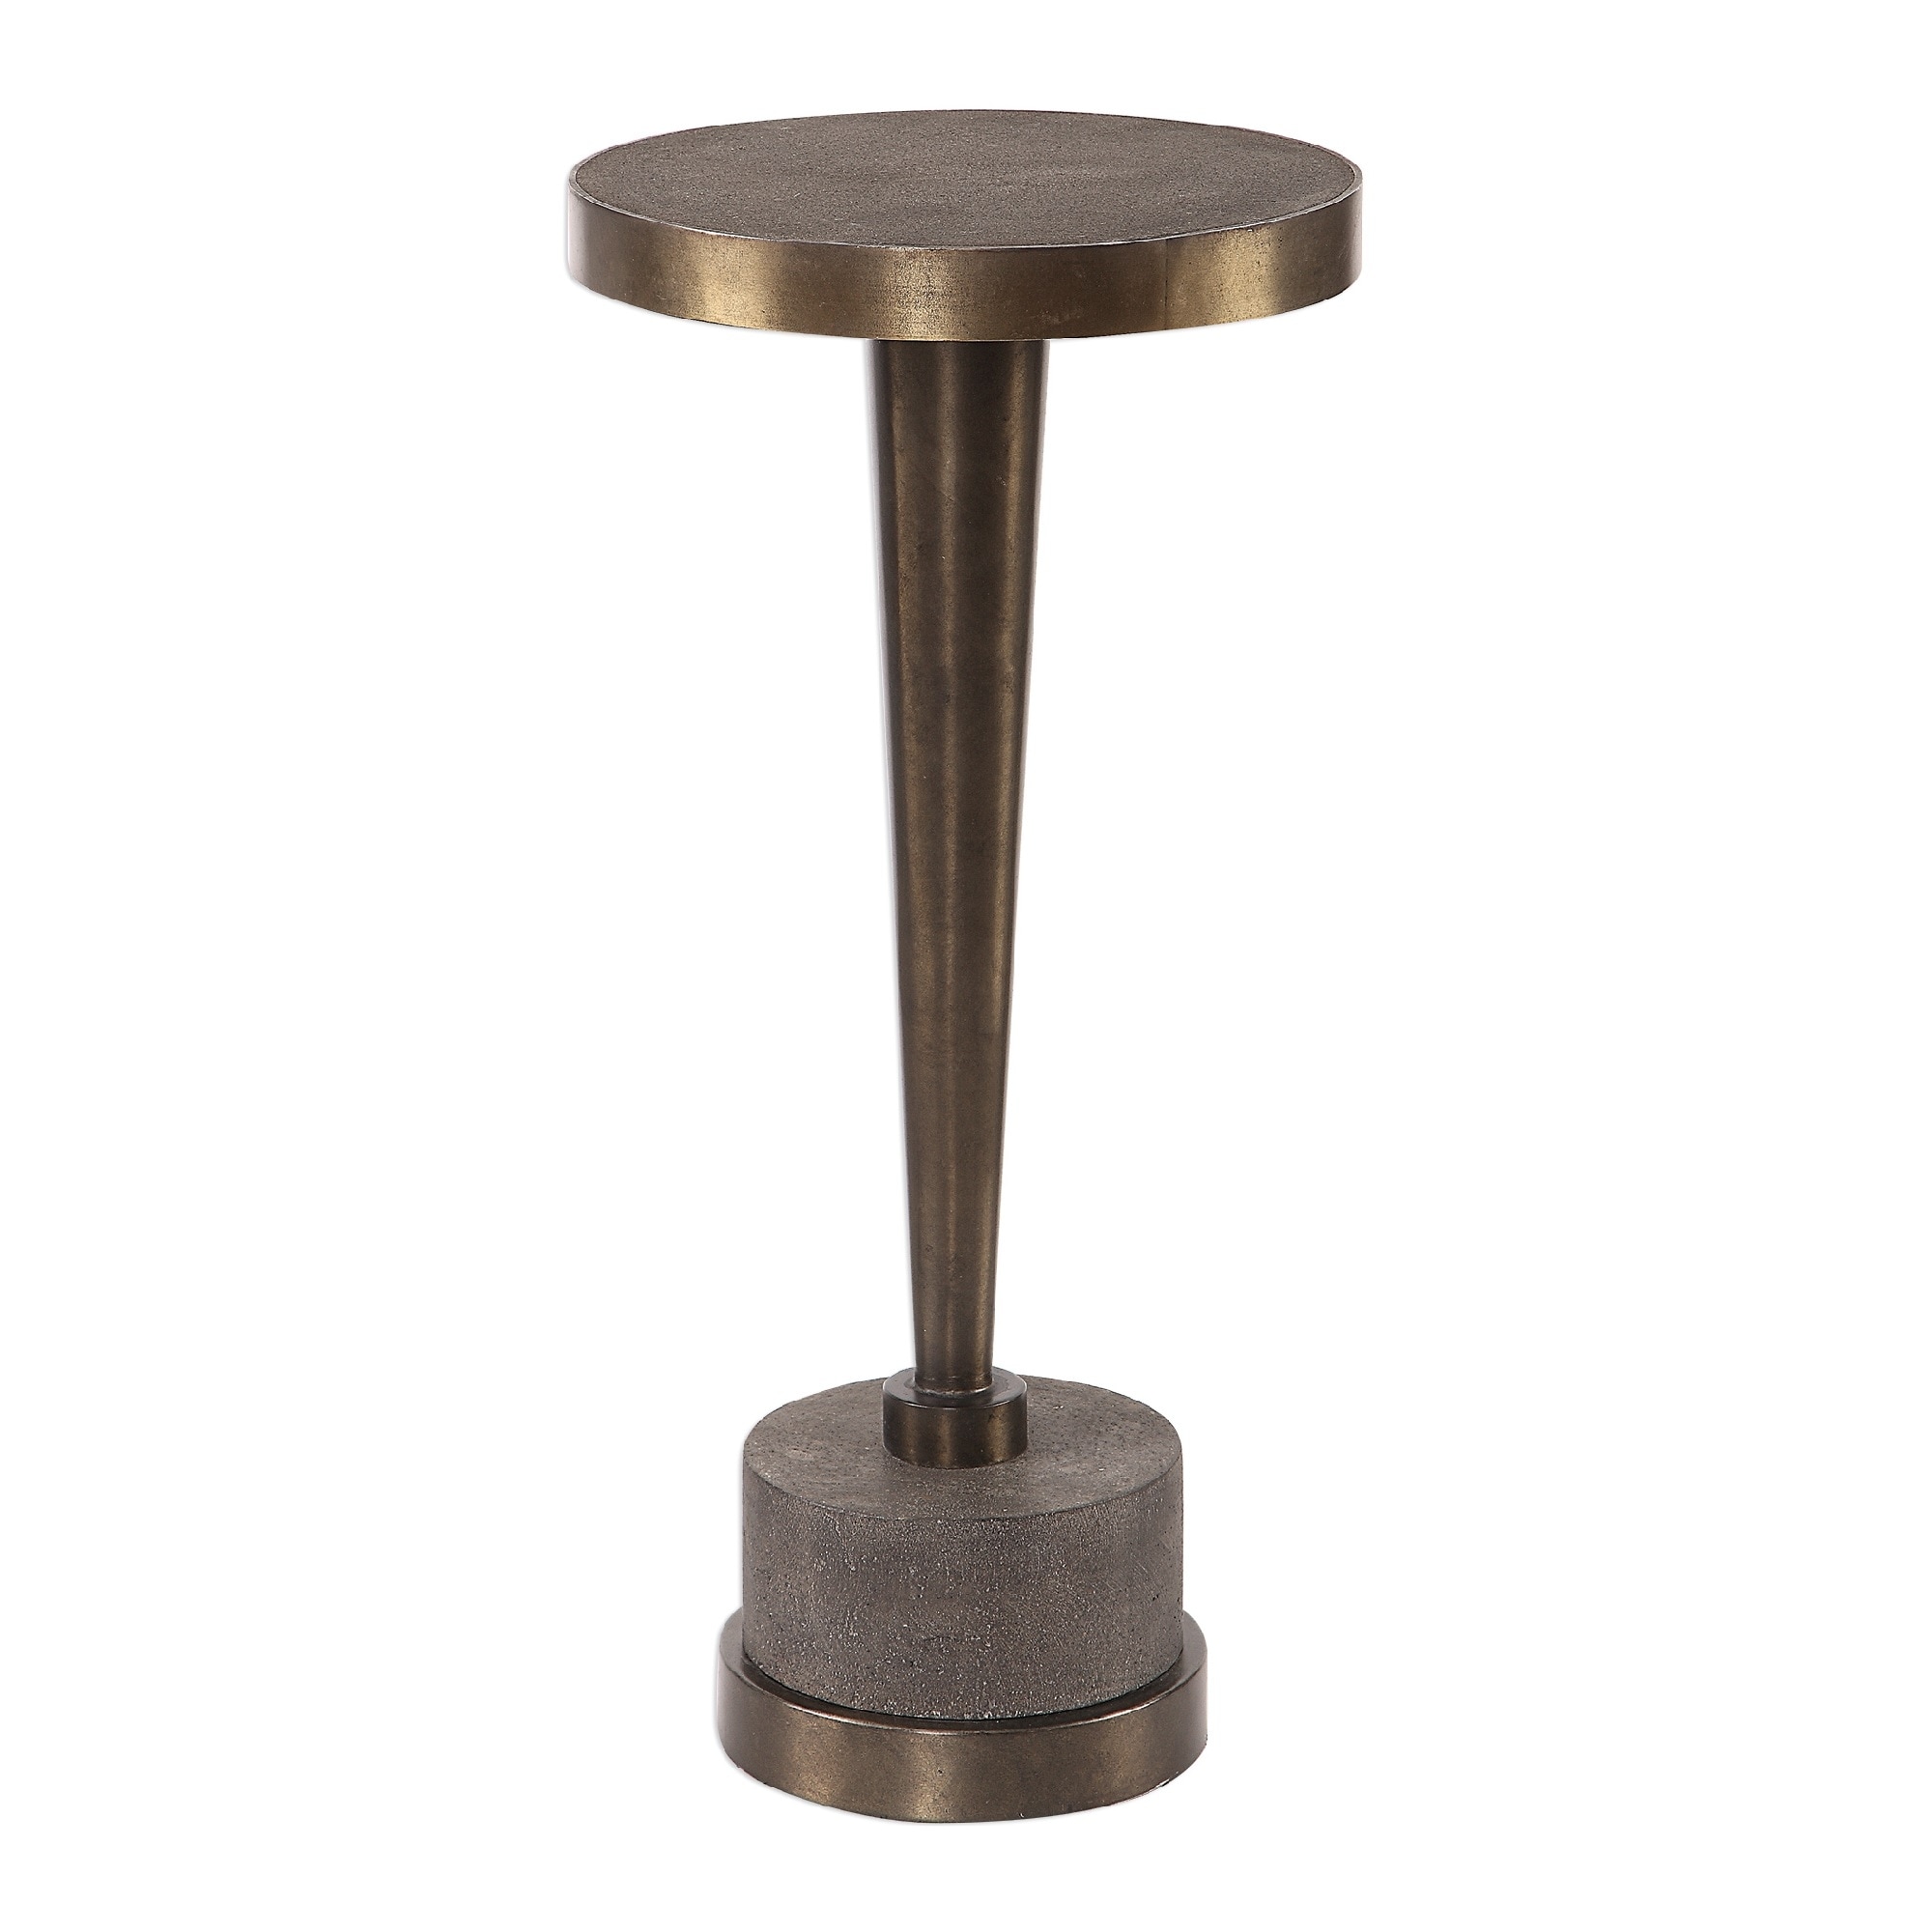 21.75" Bronzed Metal Cylindrical Accent Table on a Gray Concrete Base